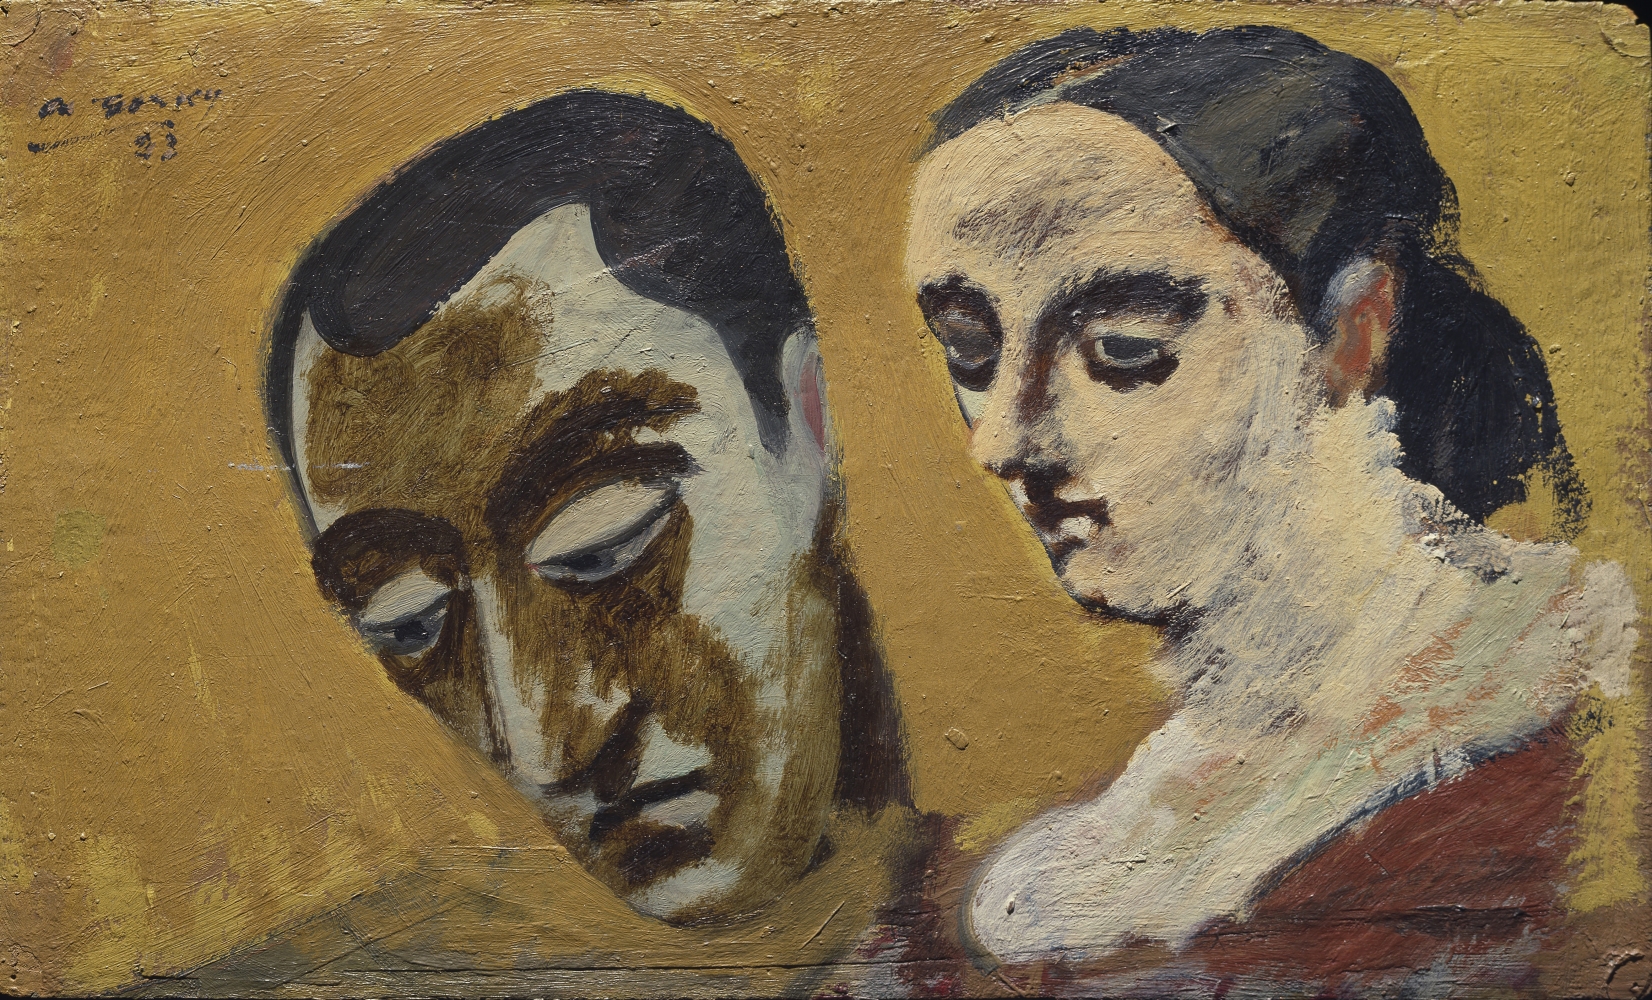 Portrait of Myself and My Imaginary Wife, 1933&ndash;34, oil on cardboard, 8 5/8 x 14 1/4 in. (21.9 x 36.2 cm). Hirshhorn Museum and Sculpture Garden, Smithsonian Institution, Washington, D.C., Gift of the Joseph H. Hirshhorn Foundation, 66.2150.&nbsp;[AGCR: P108]